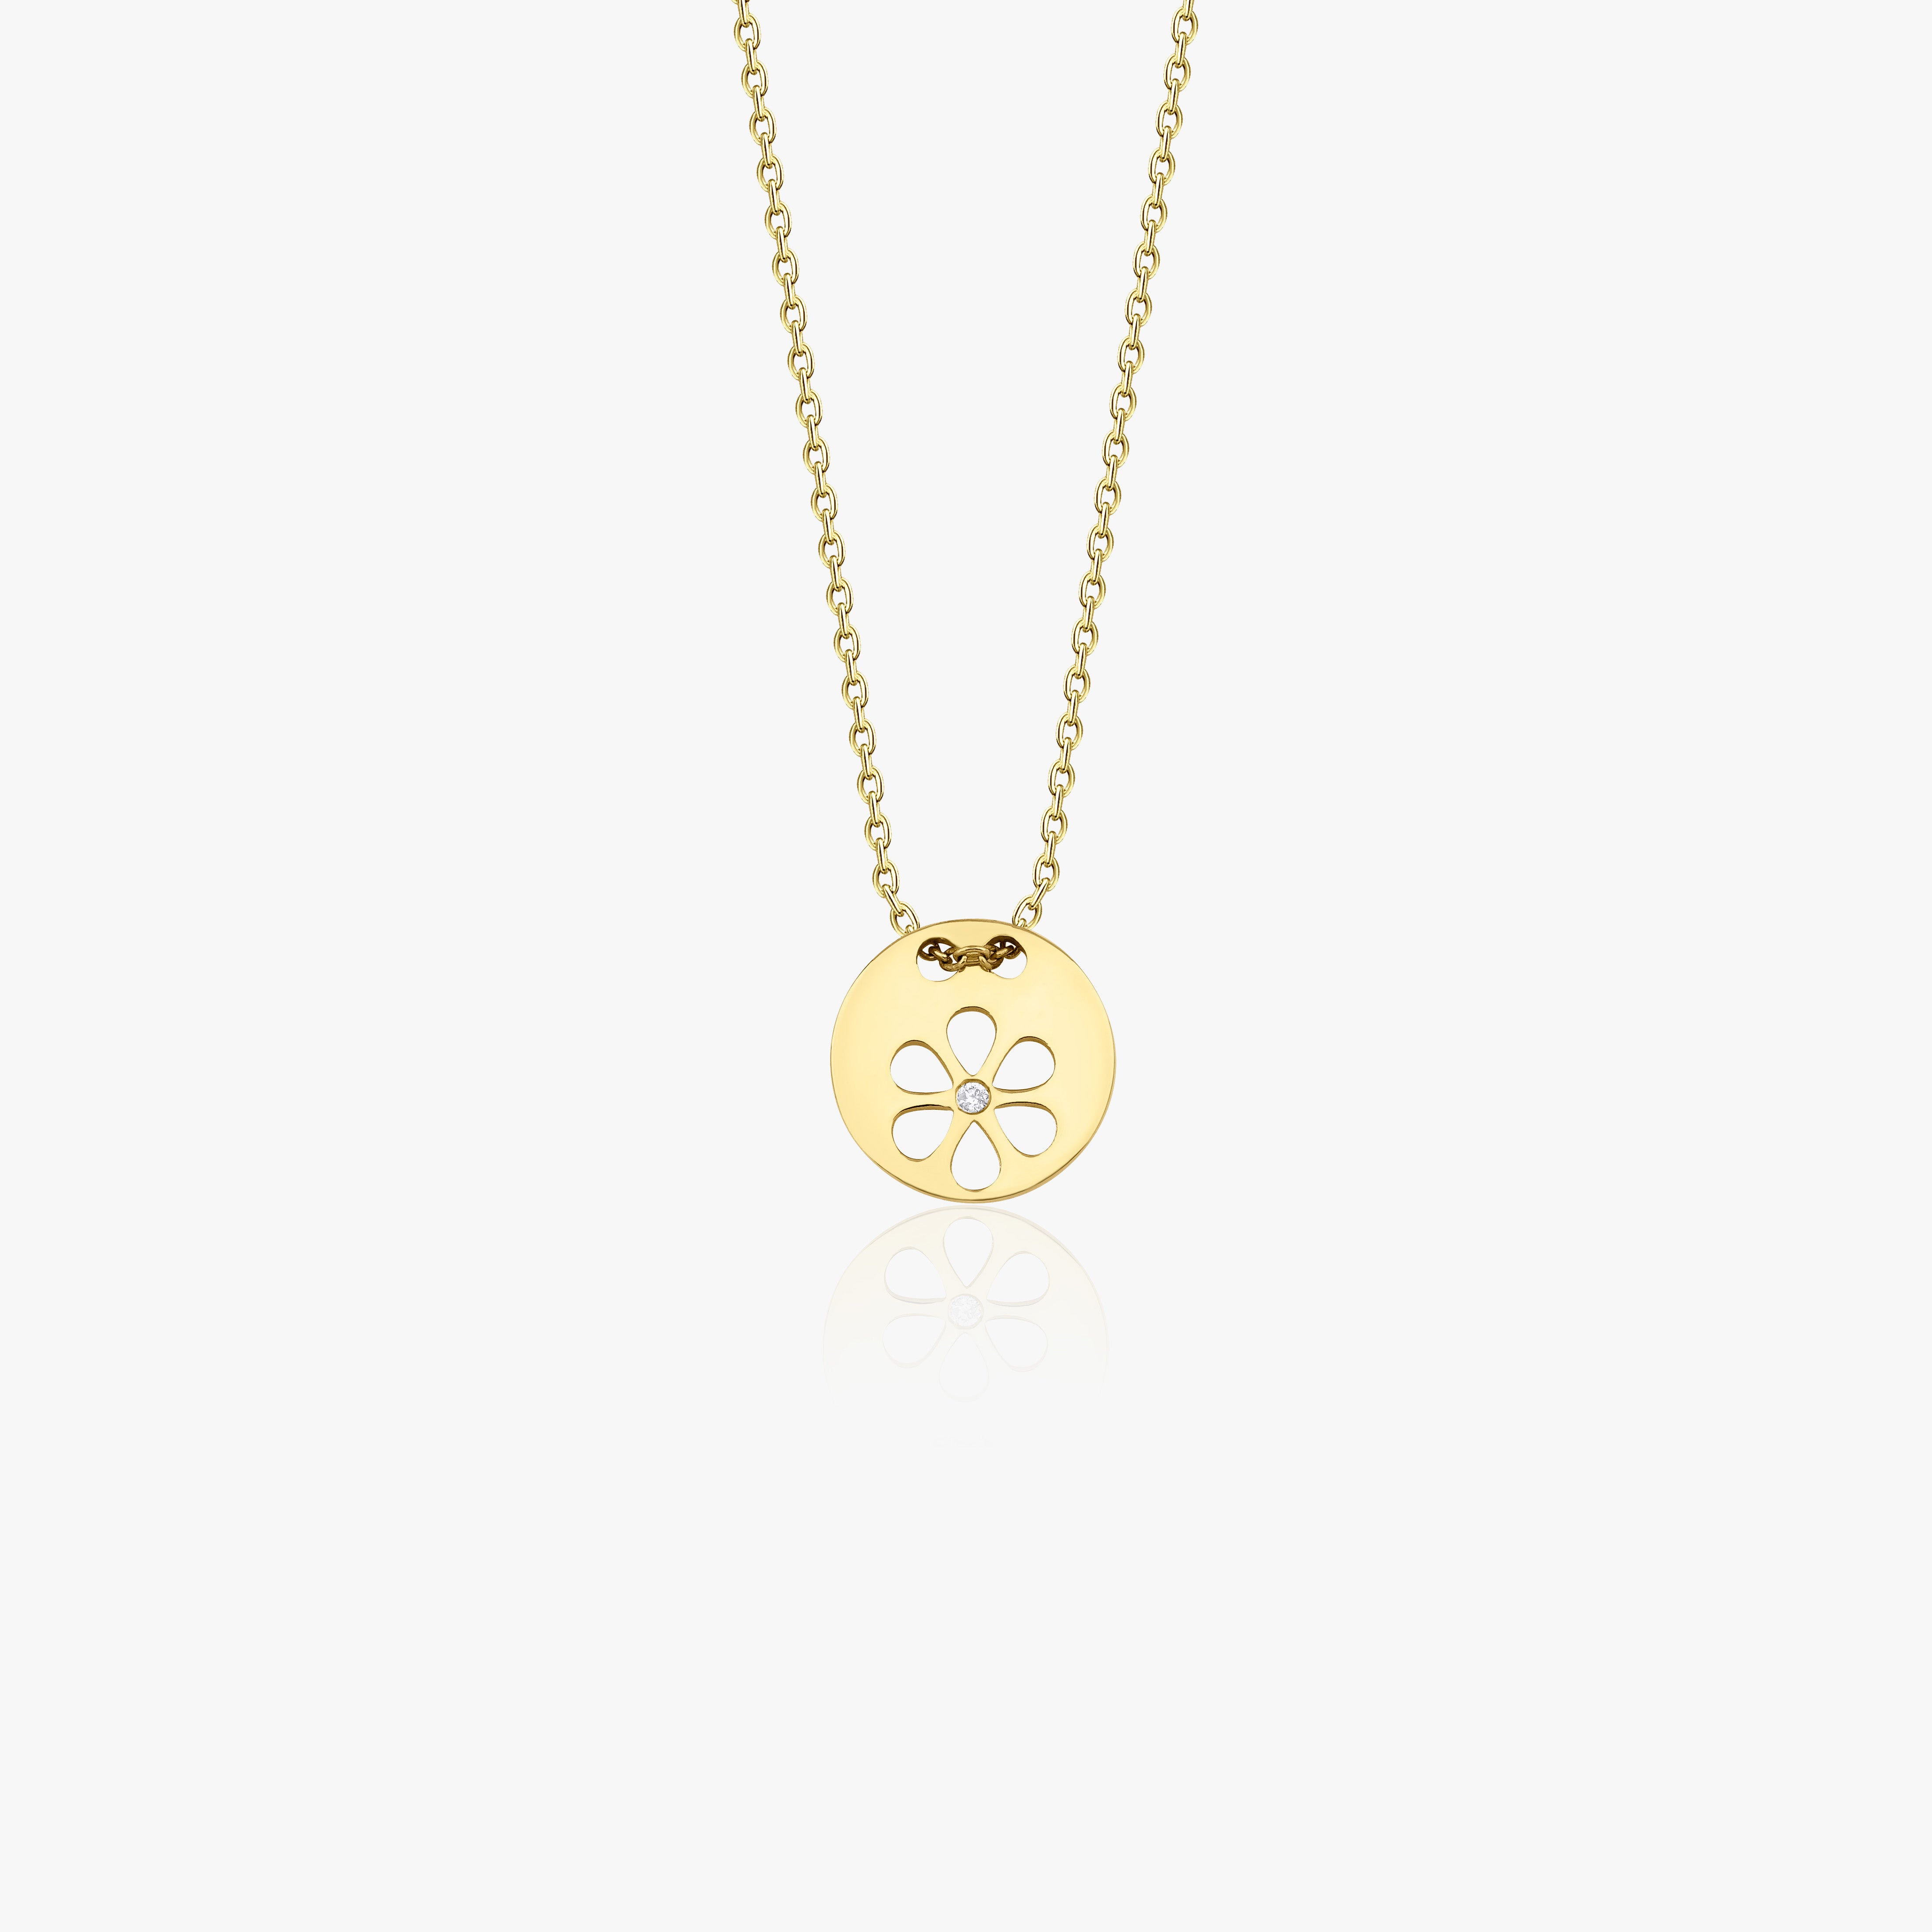 Dainty Diamond Daisy Necklace Available in 14K and 18K Gold